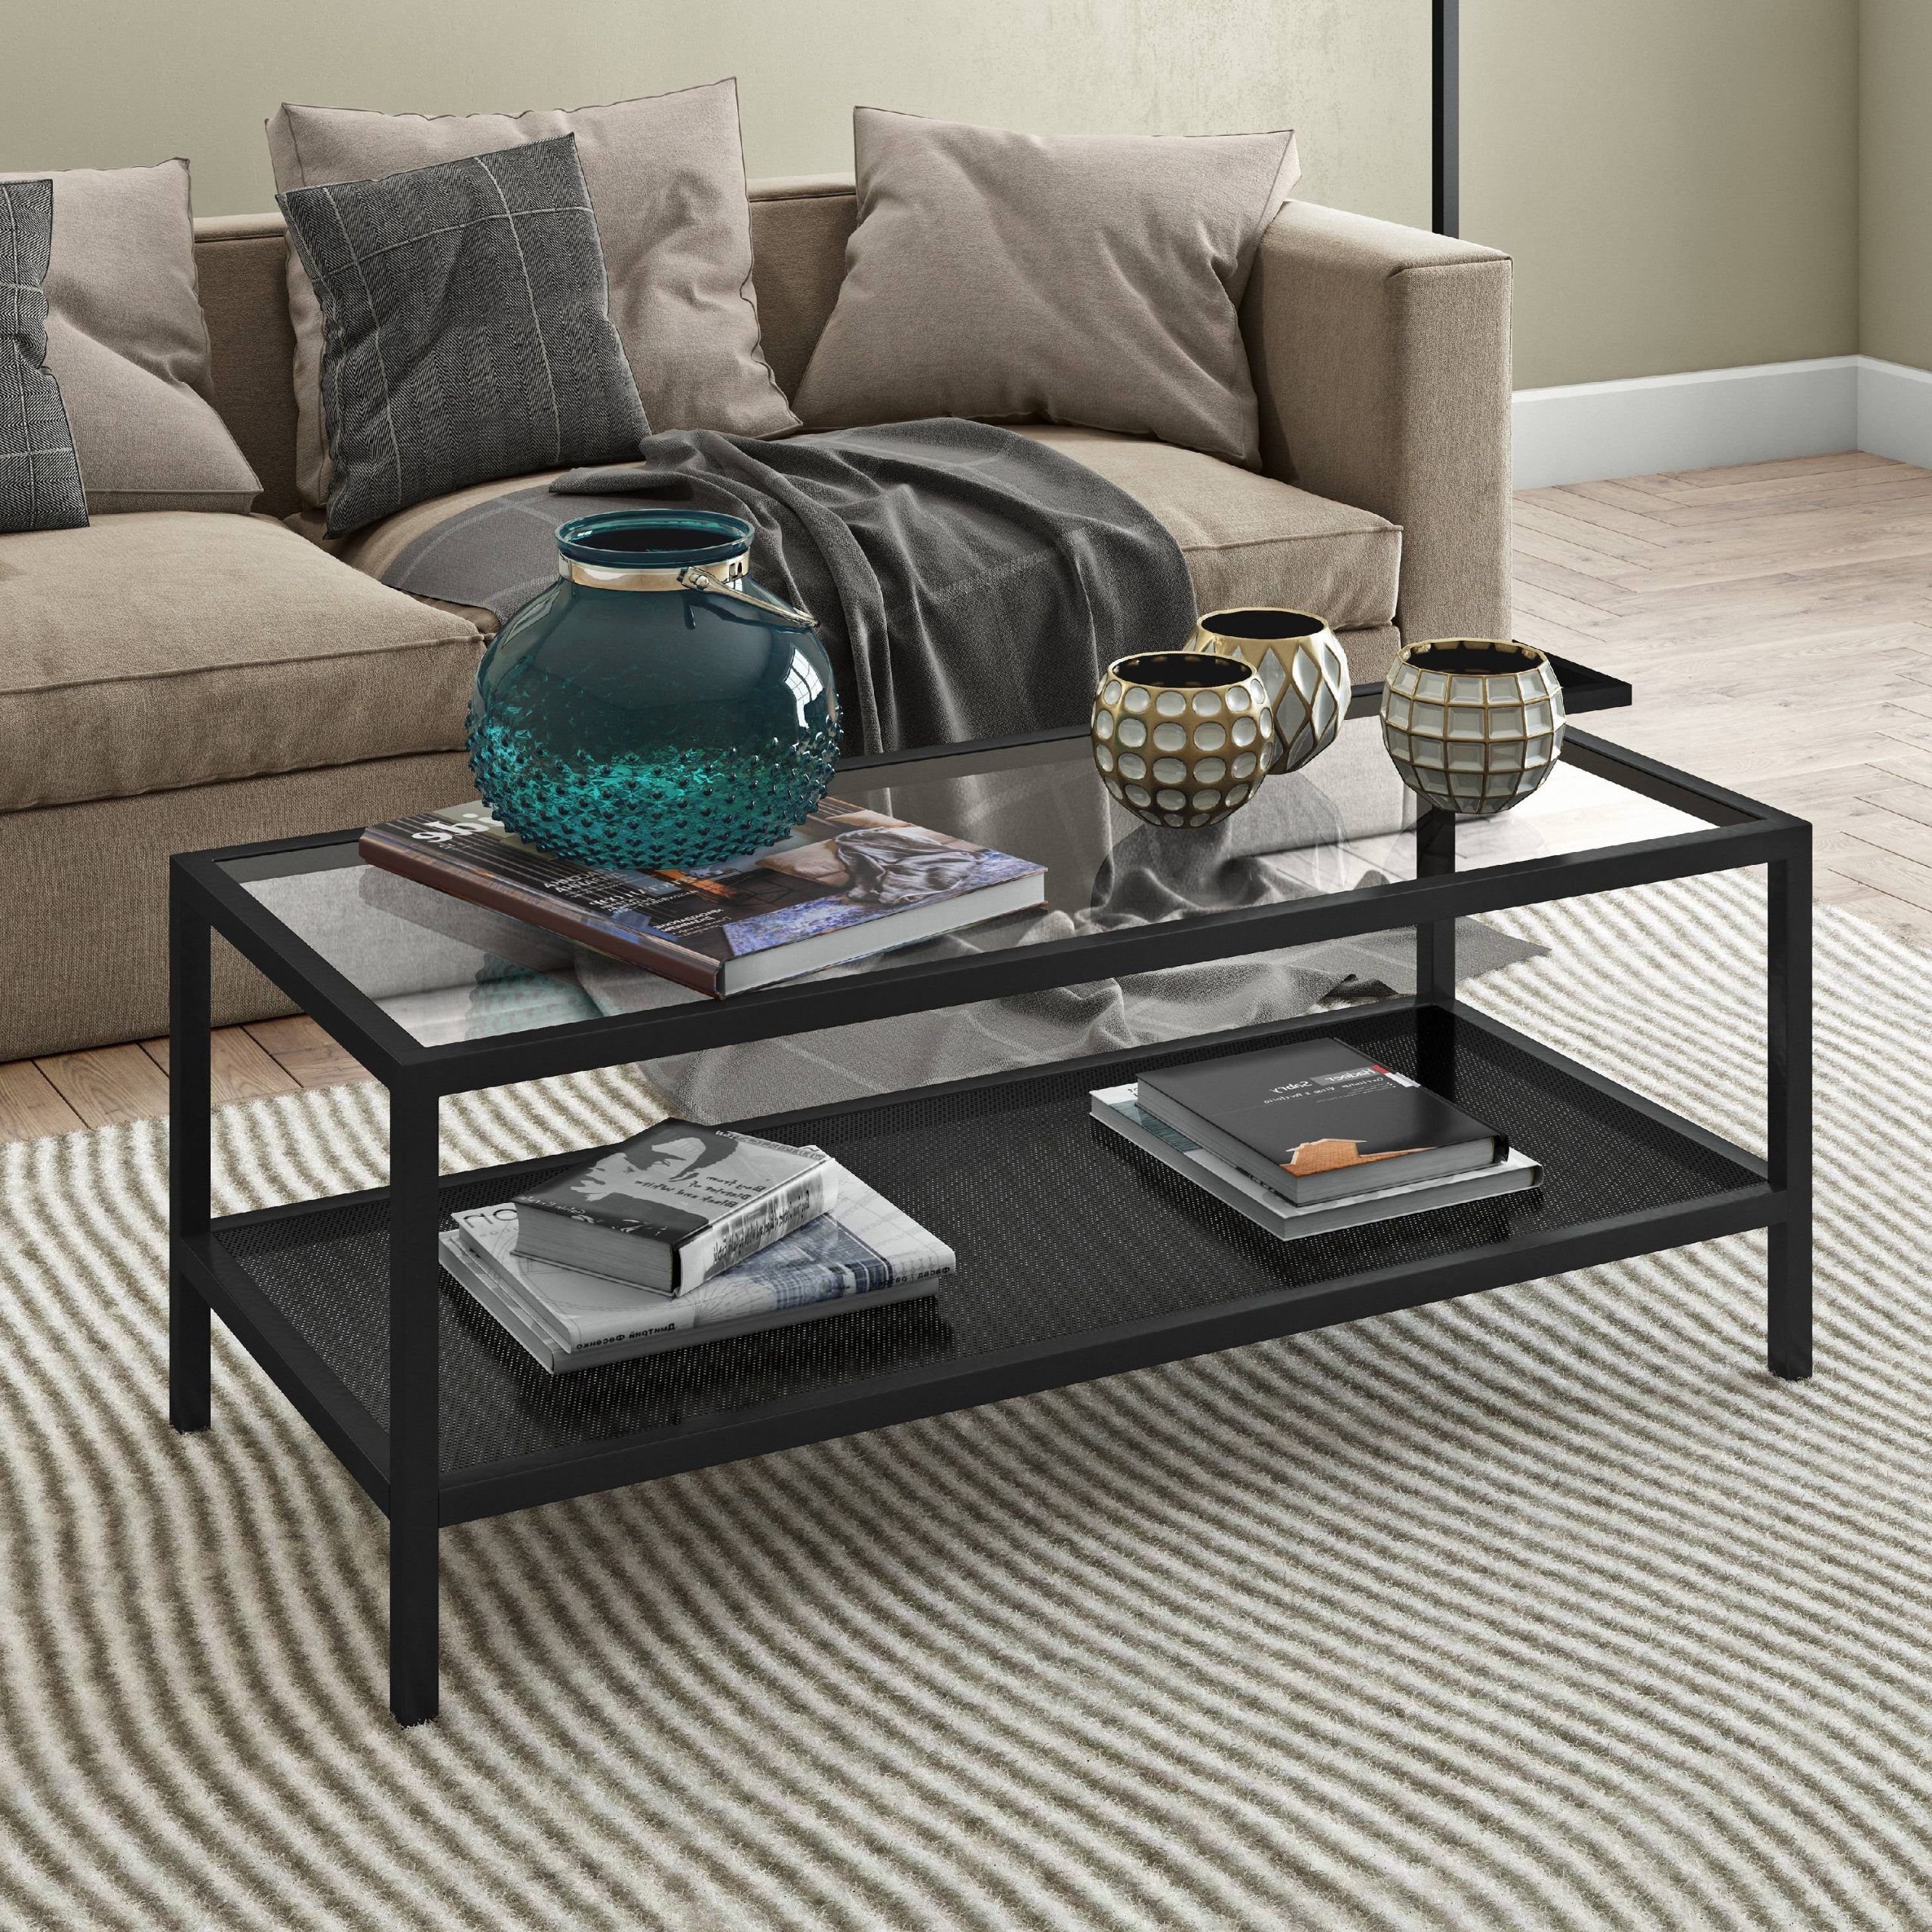 Evelyn&zoe Contemporary Metal Coffee Table With Glass Top – Walmart Regarding Glossy Finished Metal Coffee Tables (Gallery 7 of 20)